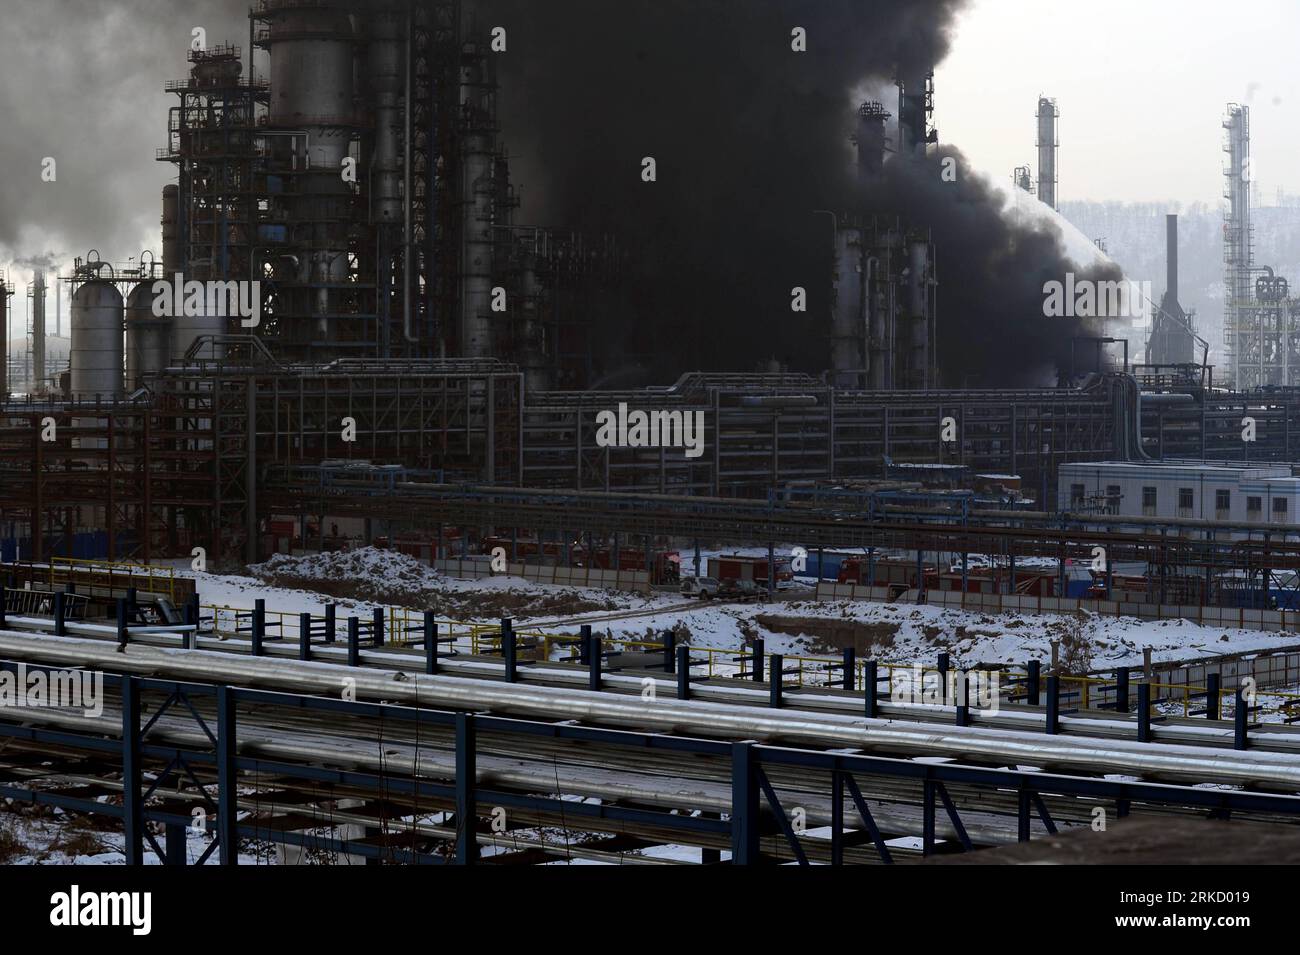 Bildnummer: 54831080  Datum: 19.01.2011  Copyright: imago/Xinhua (110119) -- FUSHUN, Jan. 19, 2011 (Xinhua) -- Smoke rises from the site where an explosion occurred at a refinery of Fushun Petrochemical Company in Fushun, northeast China s Liaoning Province, Jan. 19, 2011. Firefighters have brought the fire under control, eliminating the possibility of secondary explosions. At least 30 were sent to hospitals after they were wounded in the incident. (Xinhua/Yao Jianfeng) (hdt) (FOCUS)CHINA-FUSHUN-OIL REFINERY-EXPLOSION (CN) PUBLICATIONxNOTxINxCHN Wirtschaft kbdig xkg 2011 quer premiumd  o0 Ungl Stock Photo